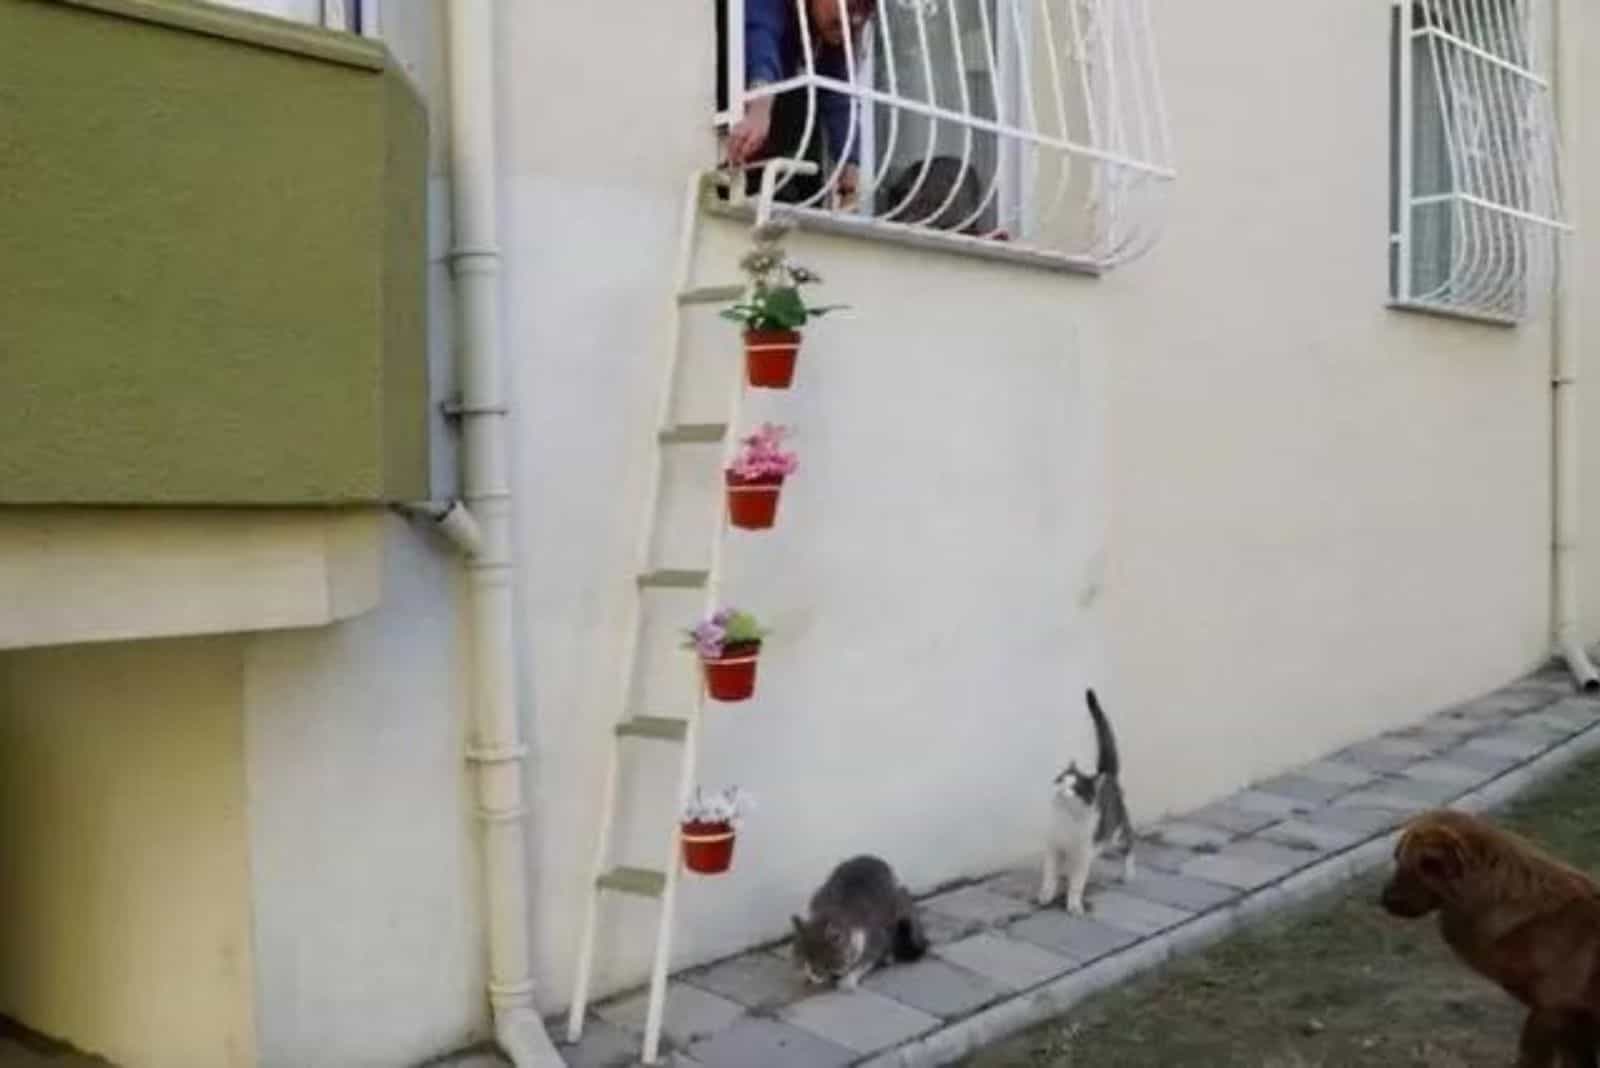 Stray cats in front of the ladder decorated with flowers